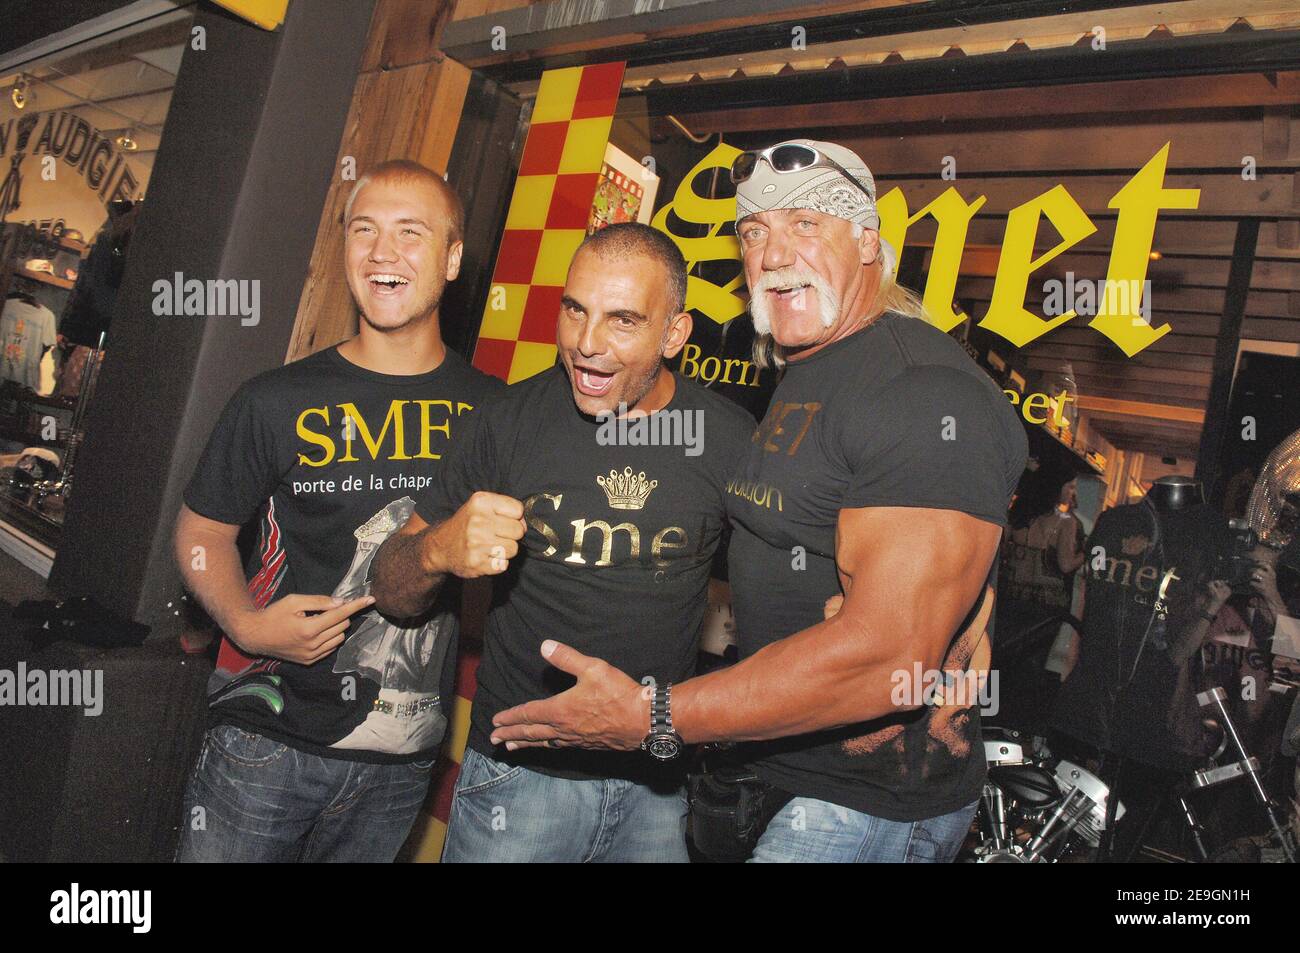 Christian Audigier presents, with Hulk and Nick Hogan, 'Smet ', his latest fashion collection honoring French rock legend Johnny Hallyday in his store of Melrose Avenue in Los Angeles, CA, USA on July 29, 2006. Photo by Lionel Hahn/ABACAPRESS.COM Stock Photo